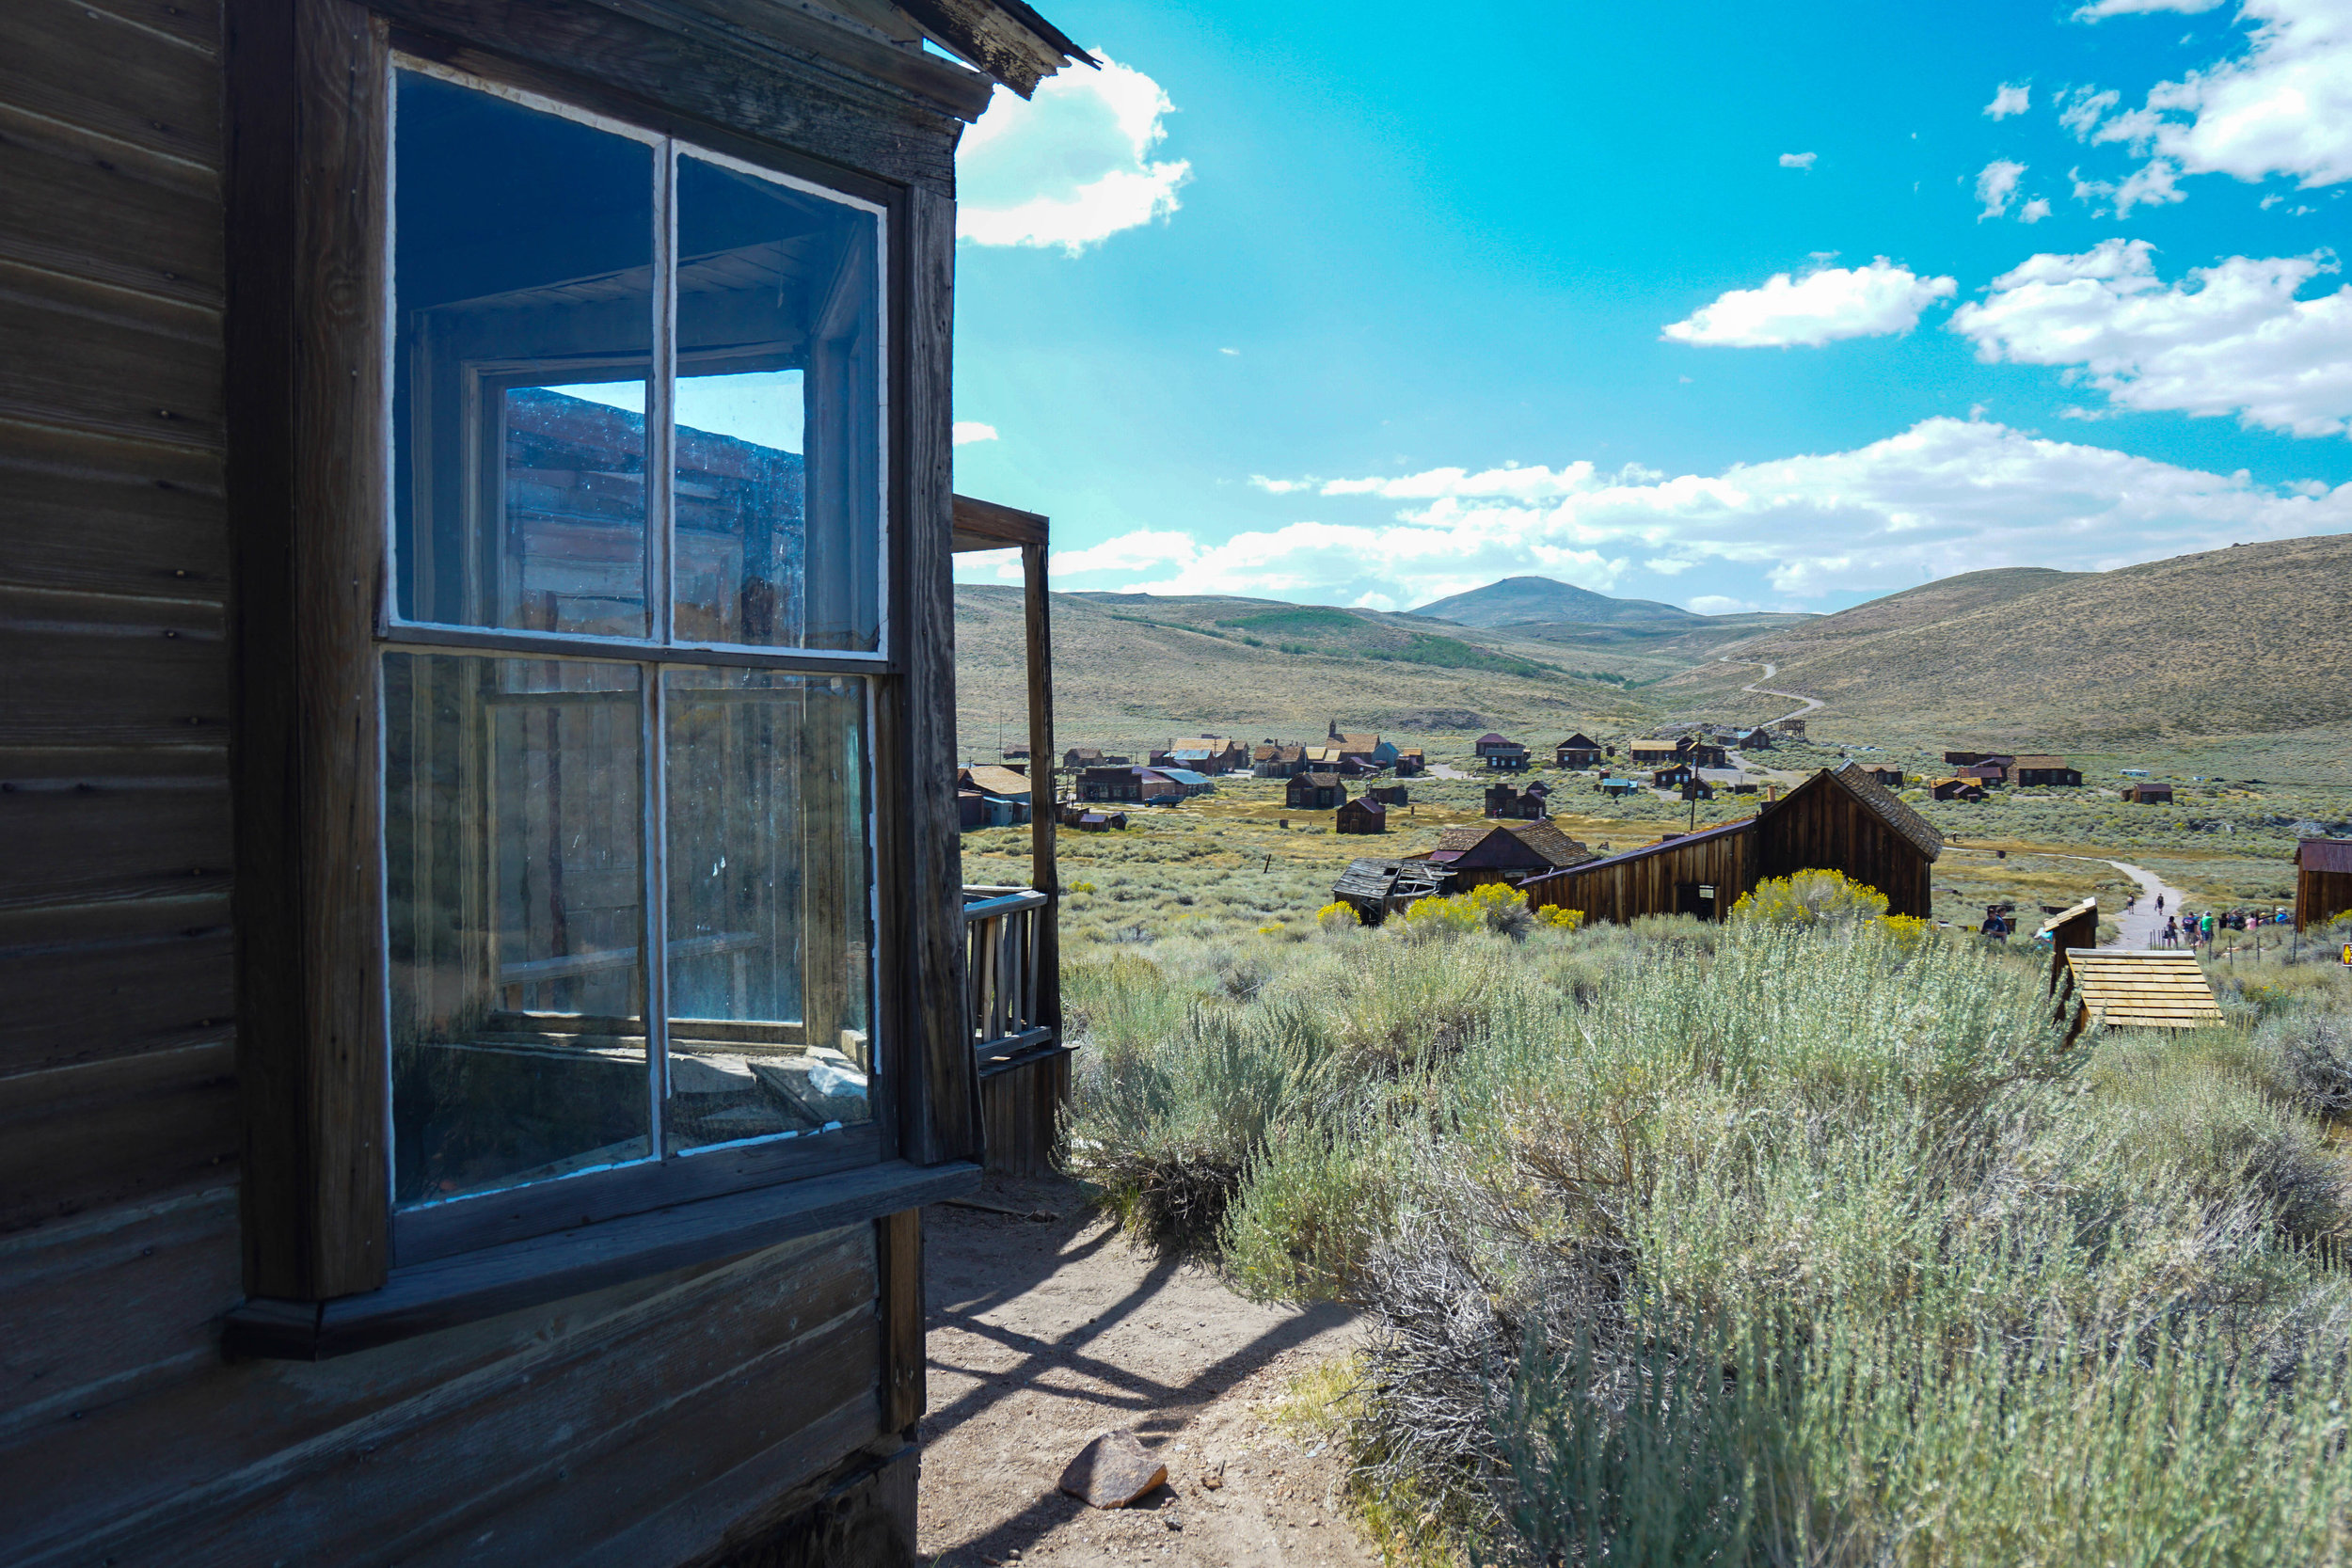 Littered with buildings of the old mining boomtown, Bodie serves as the most well-preserved gold rush town.